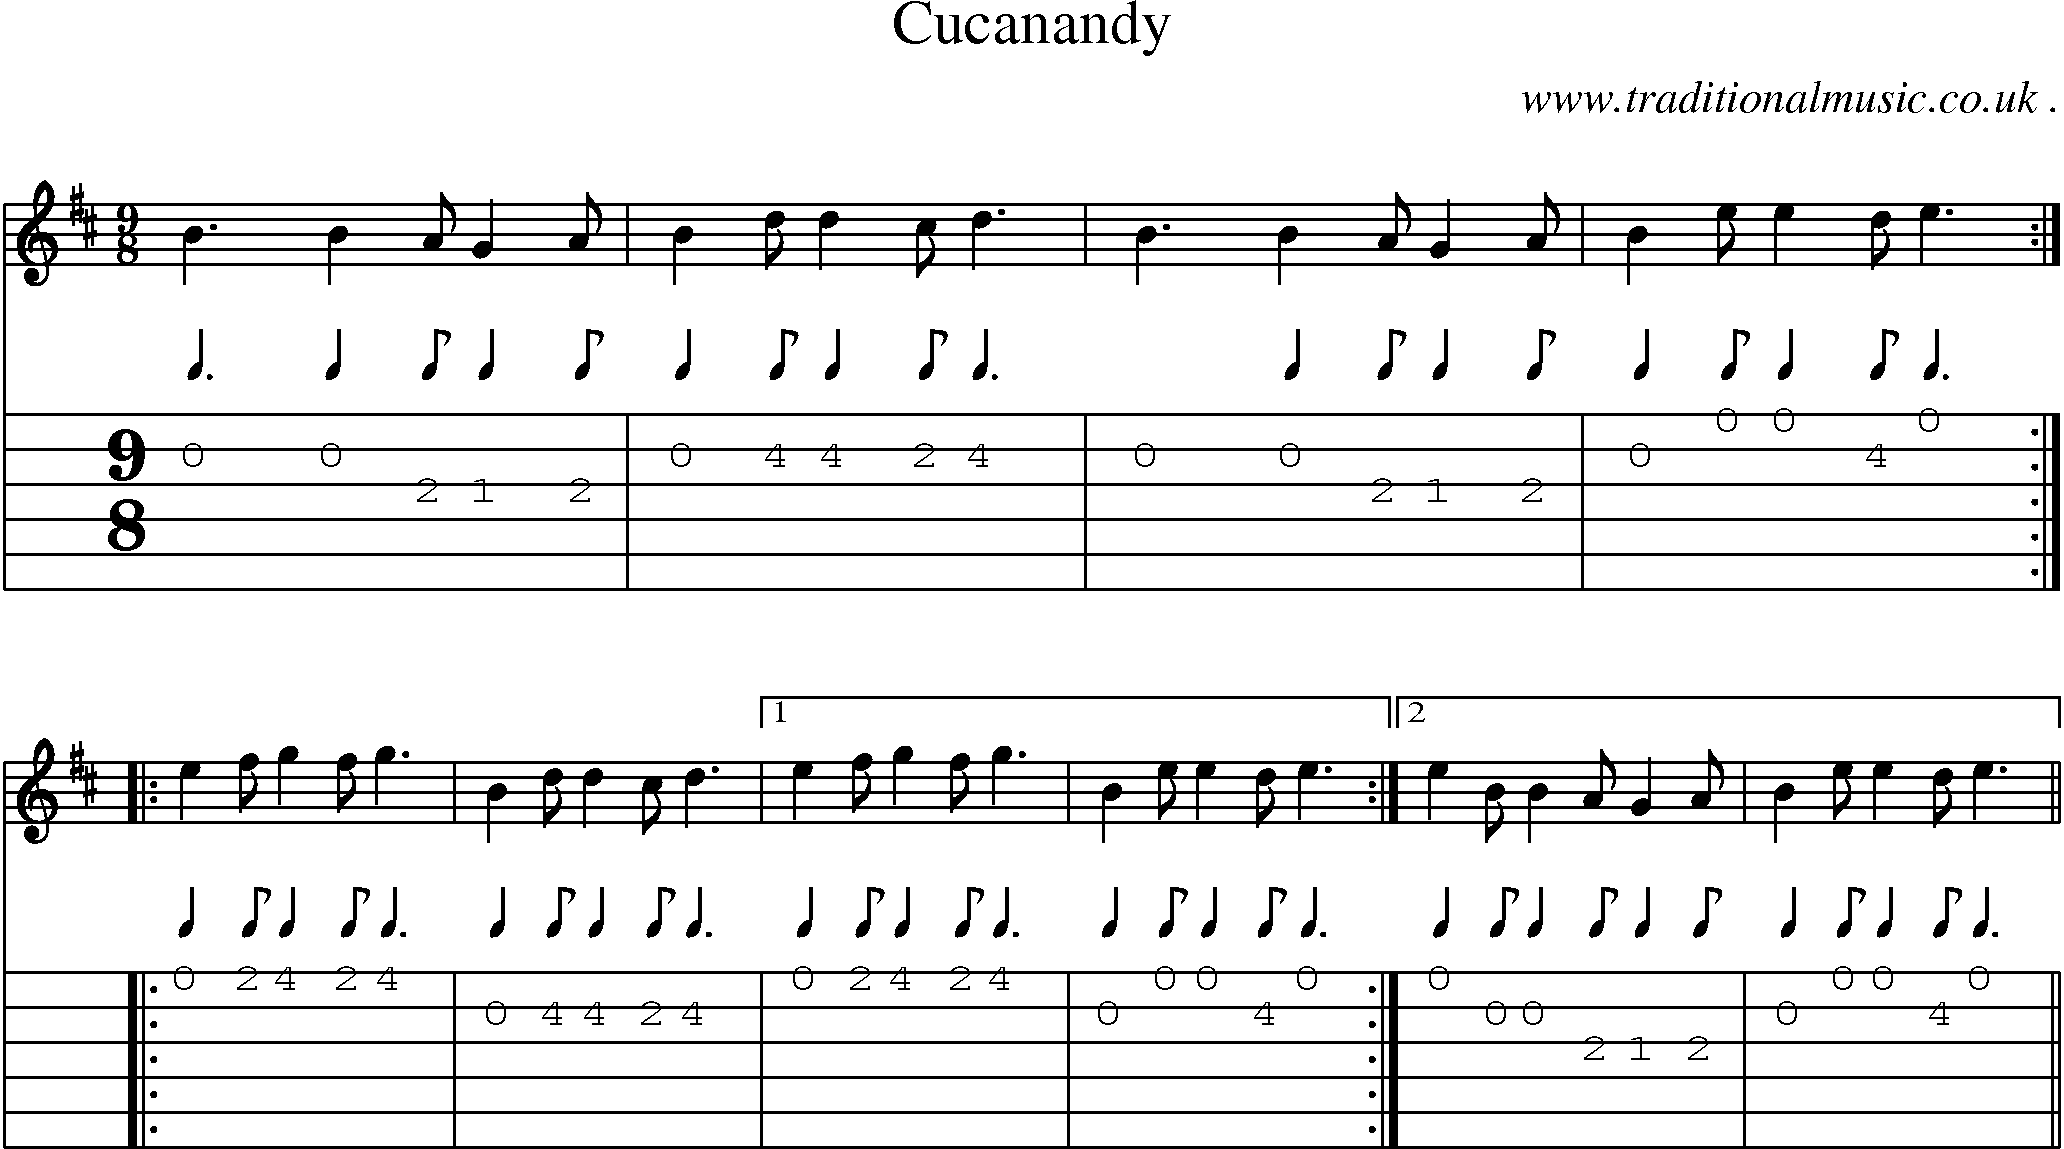 Sheet-Music and Guitar Tabs for Cucanandy